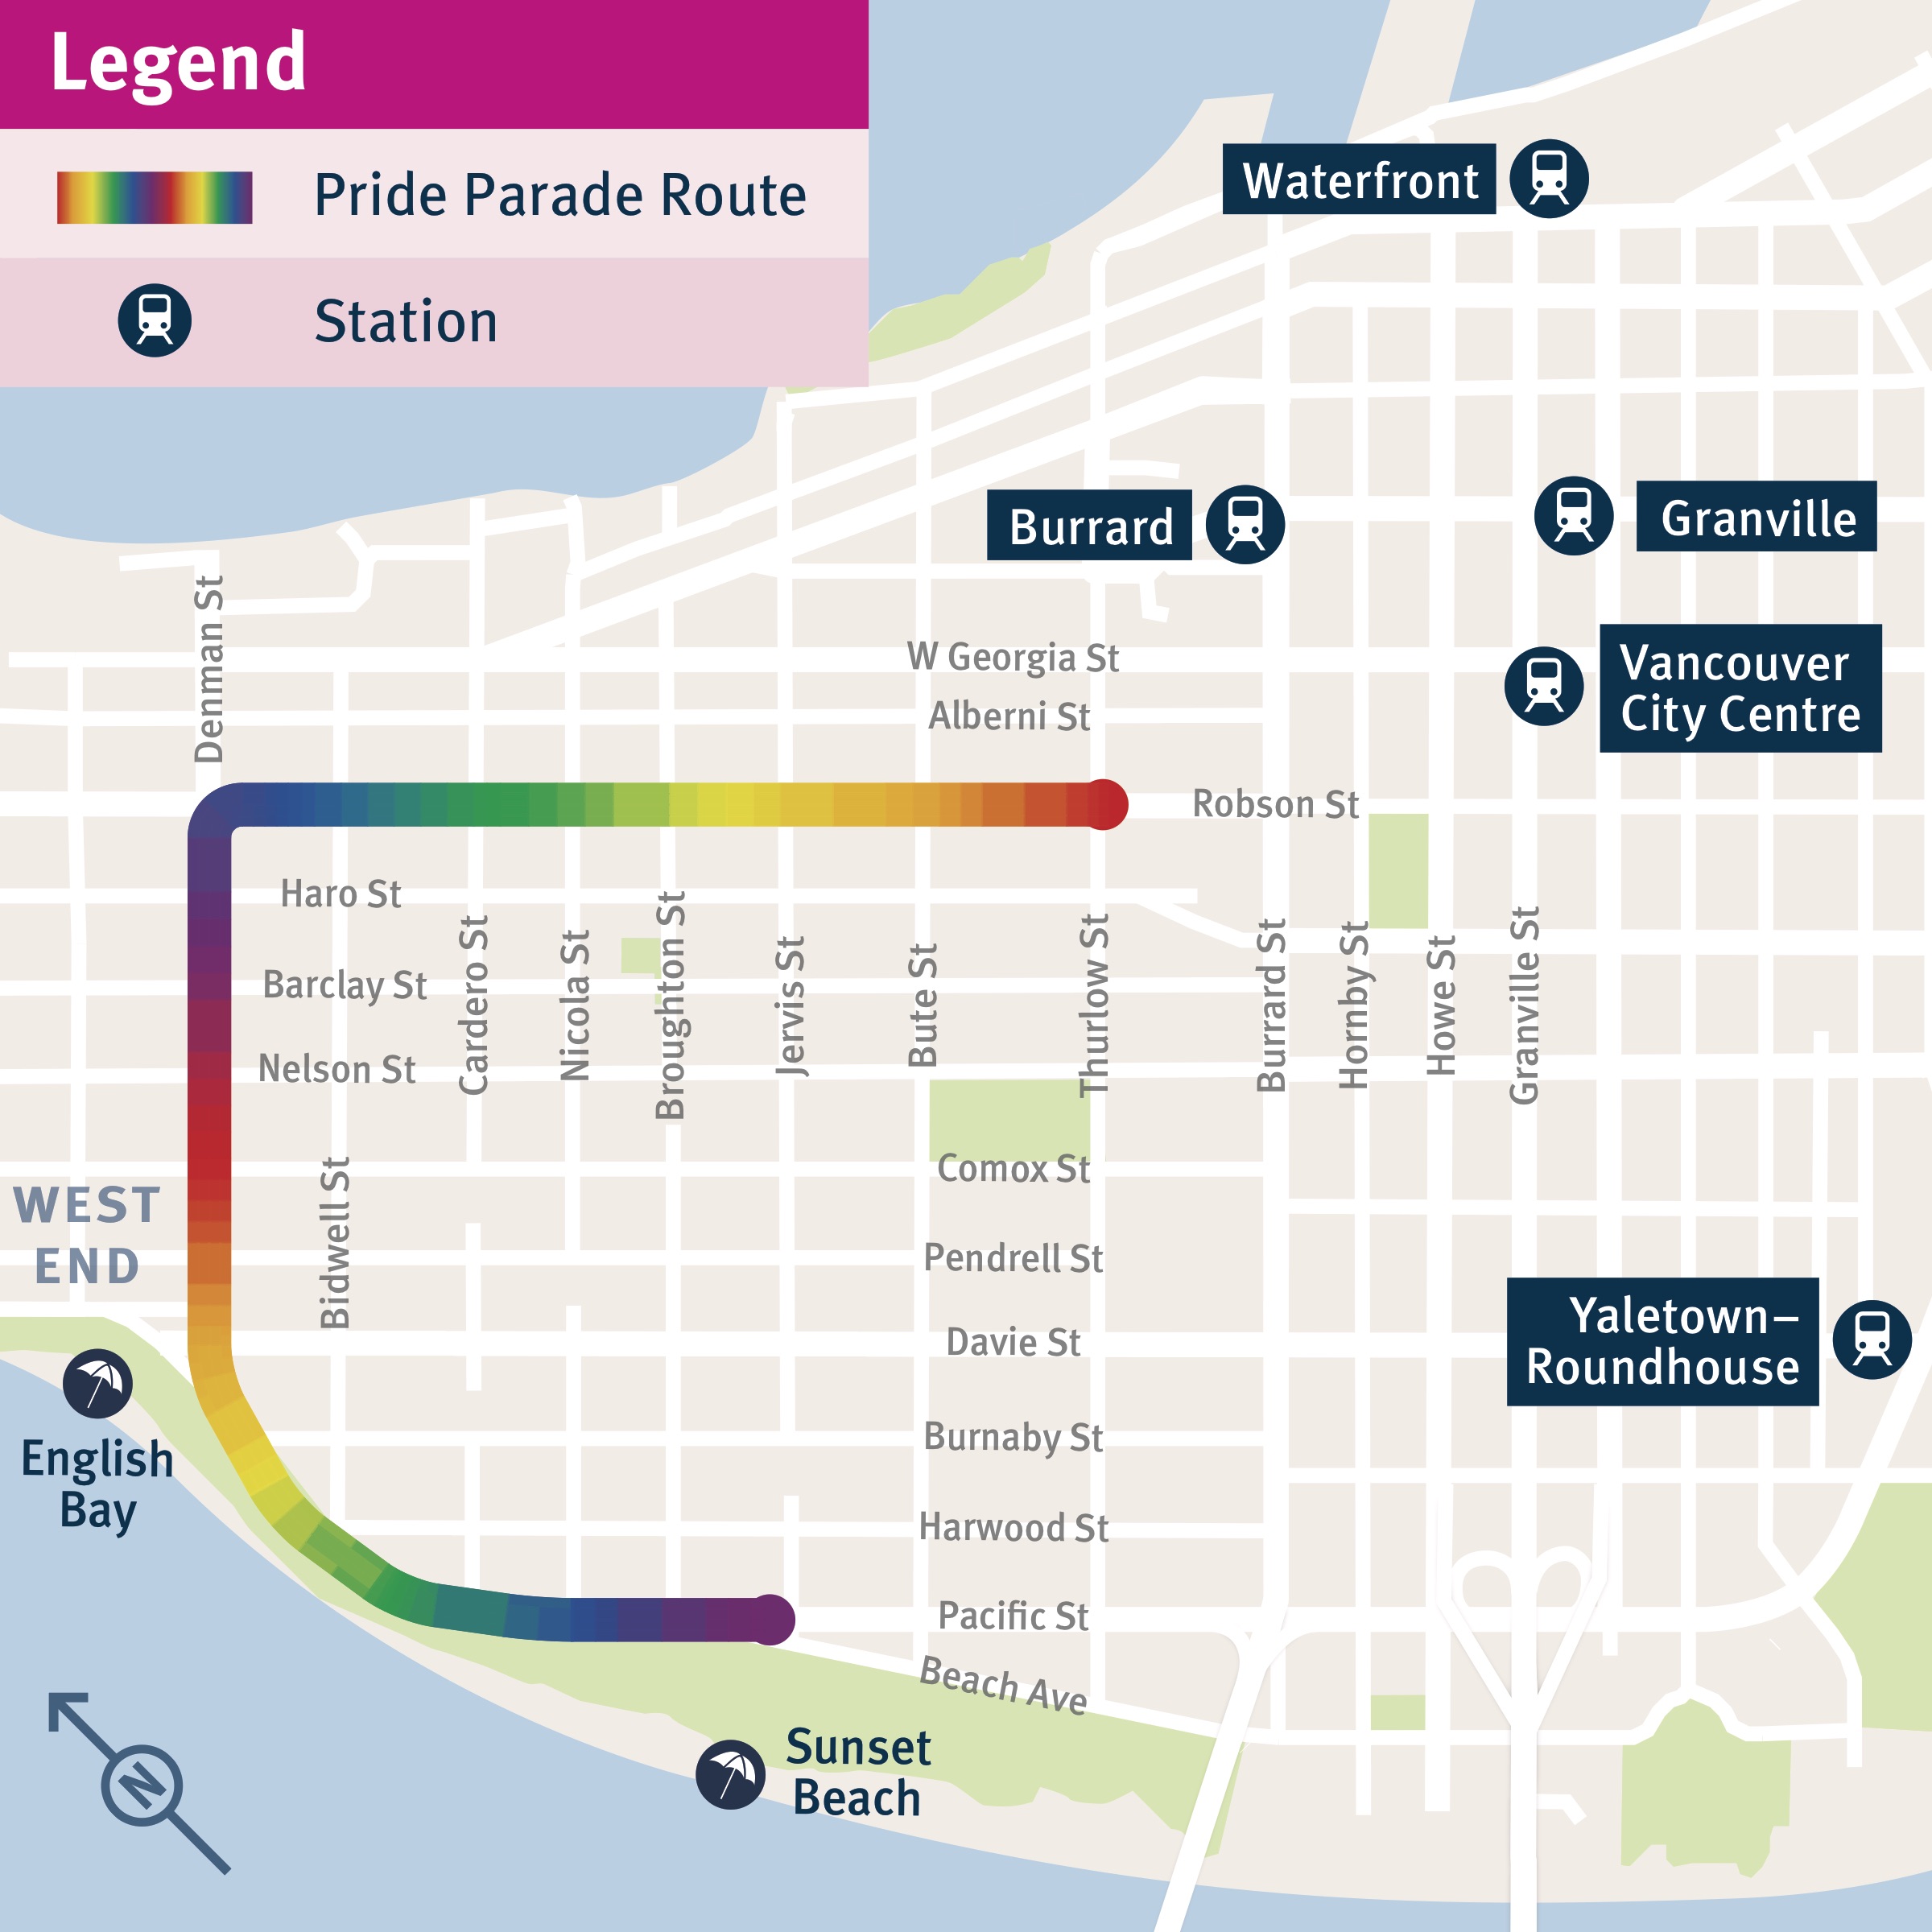 Take transit to the Vancouver Pride Parade this Sunday (CONTEST) The